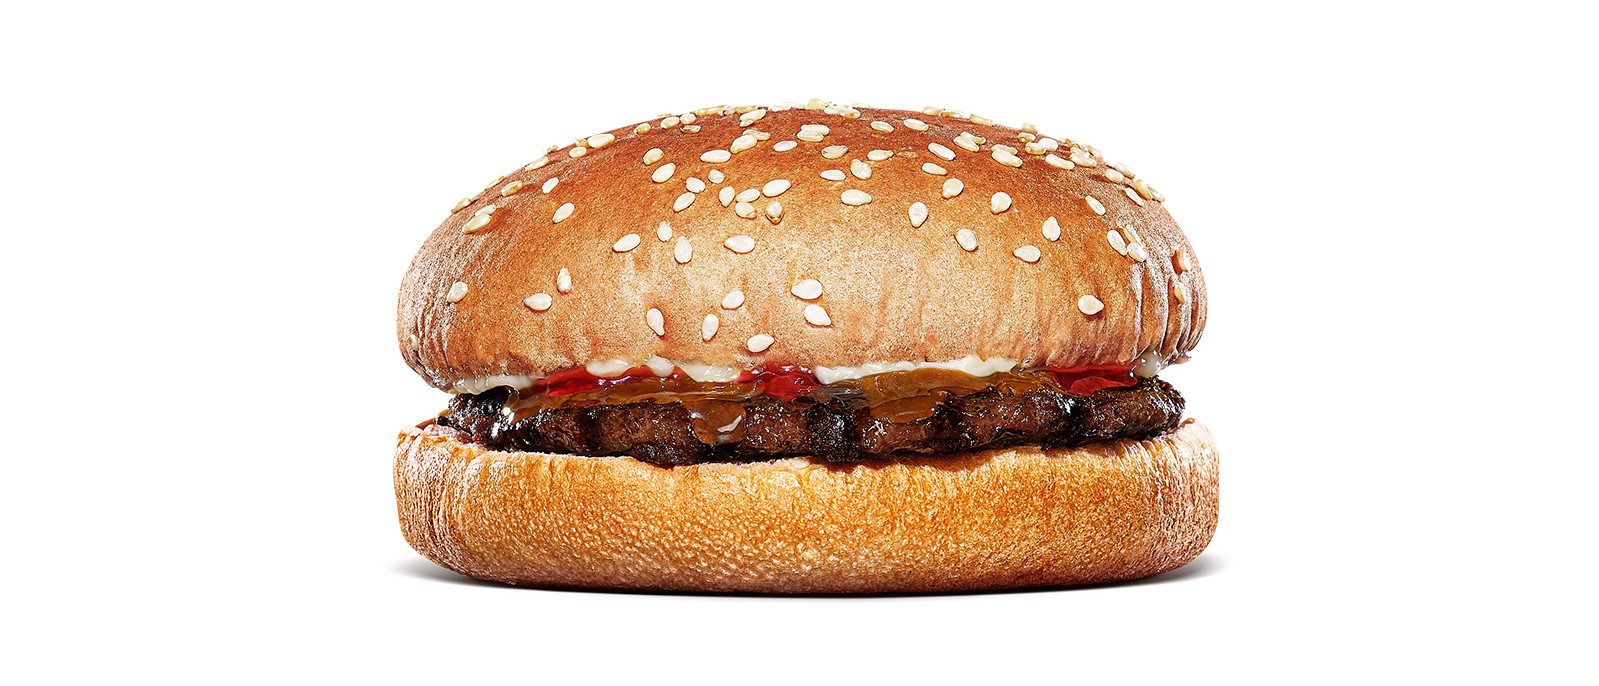 Burger King adds peanut butter burgers to its menu in Japan